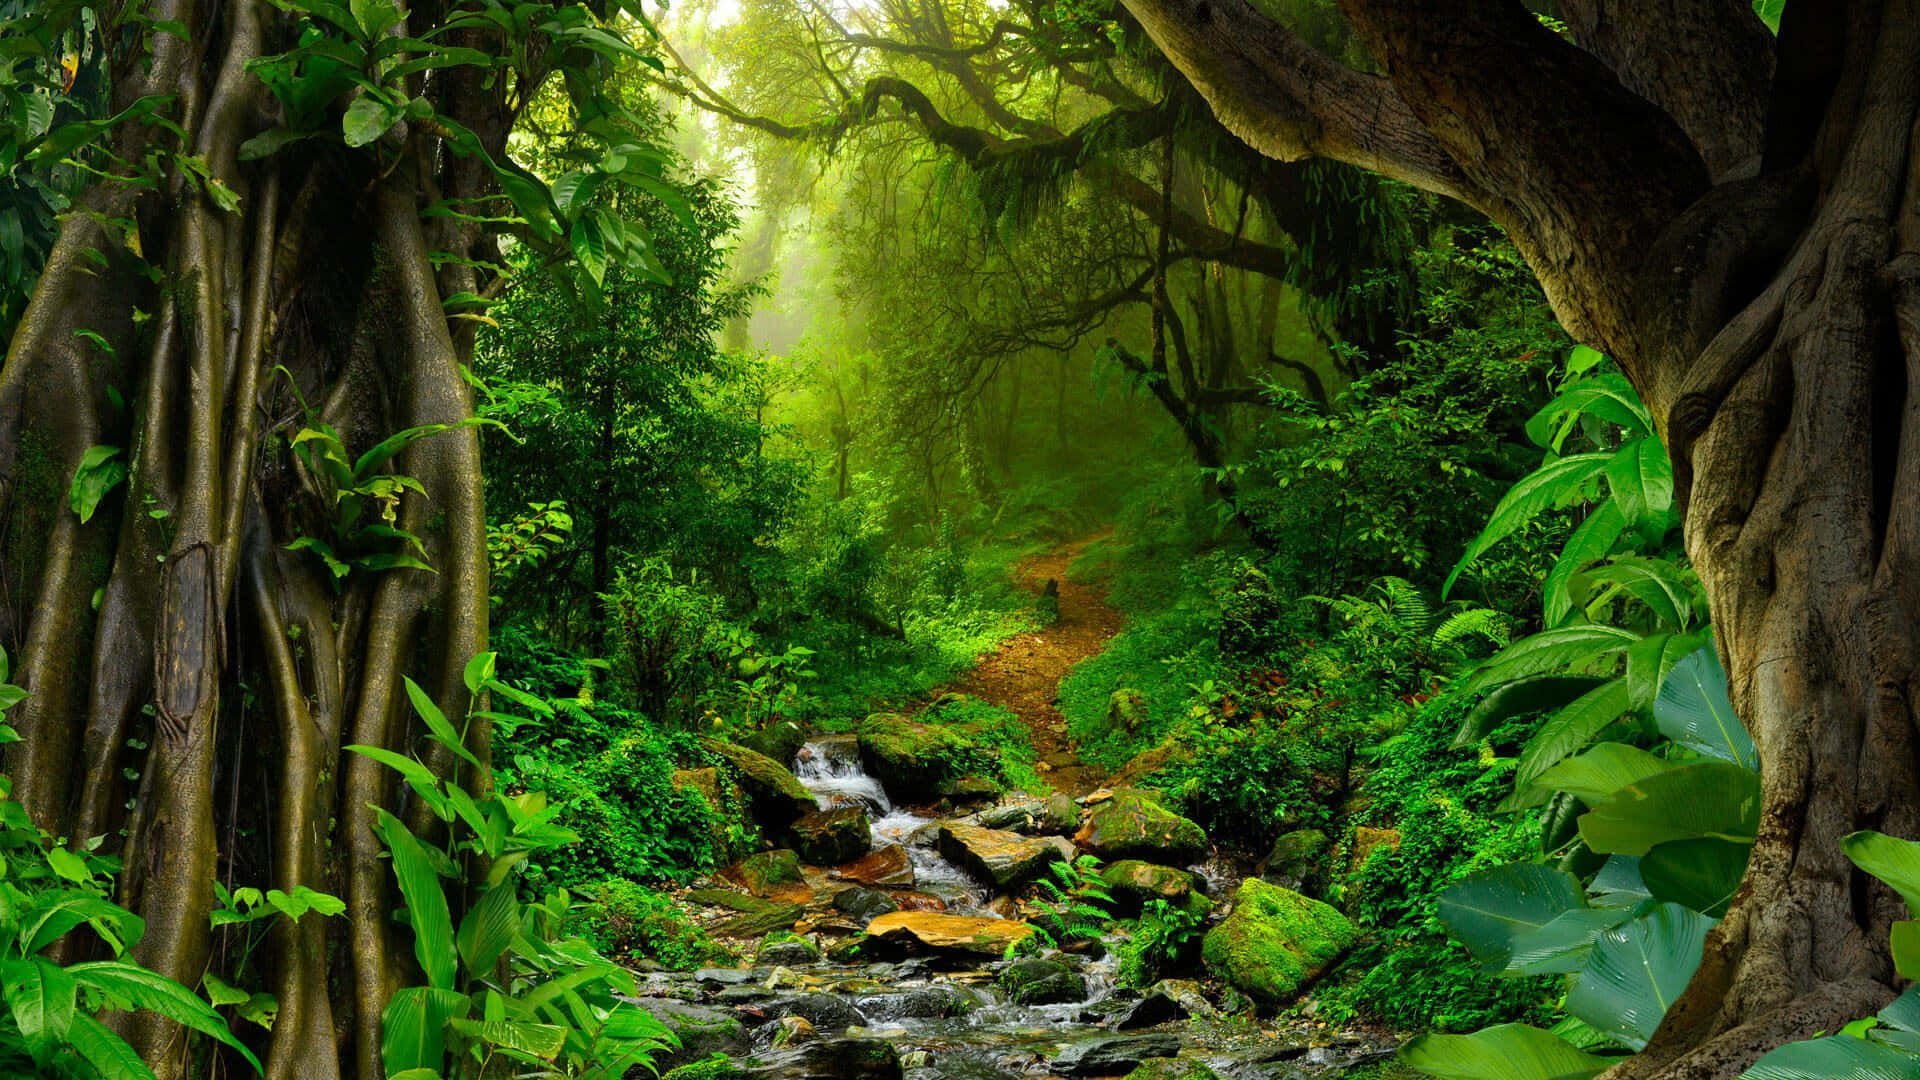 A lush and vibrant rainforest in Brazil